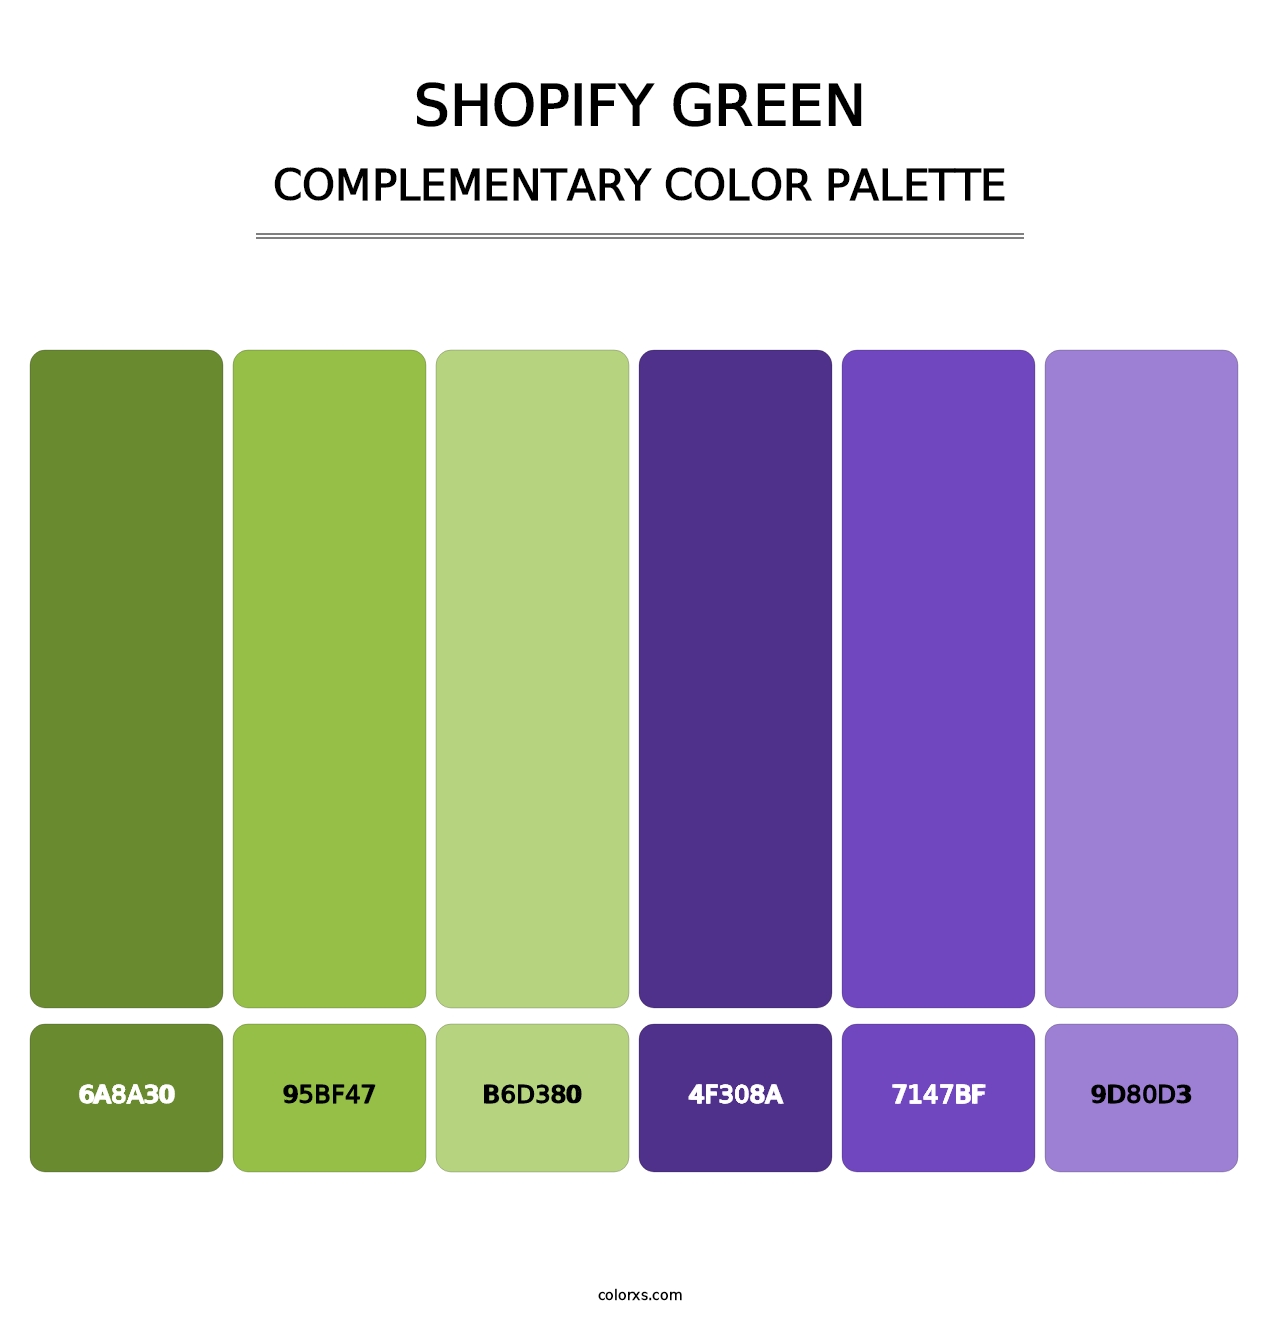 Shopify Green - Complementary Color Palette